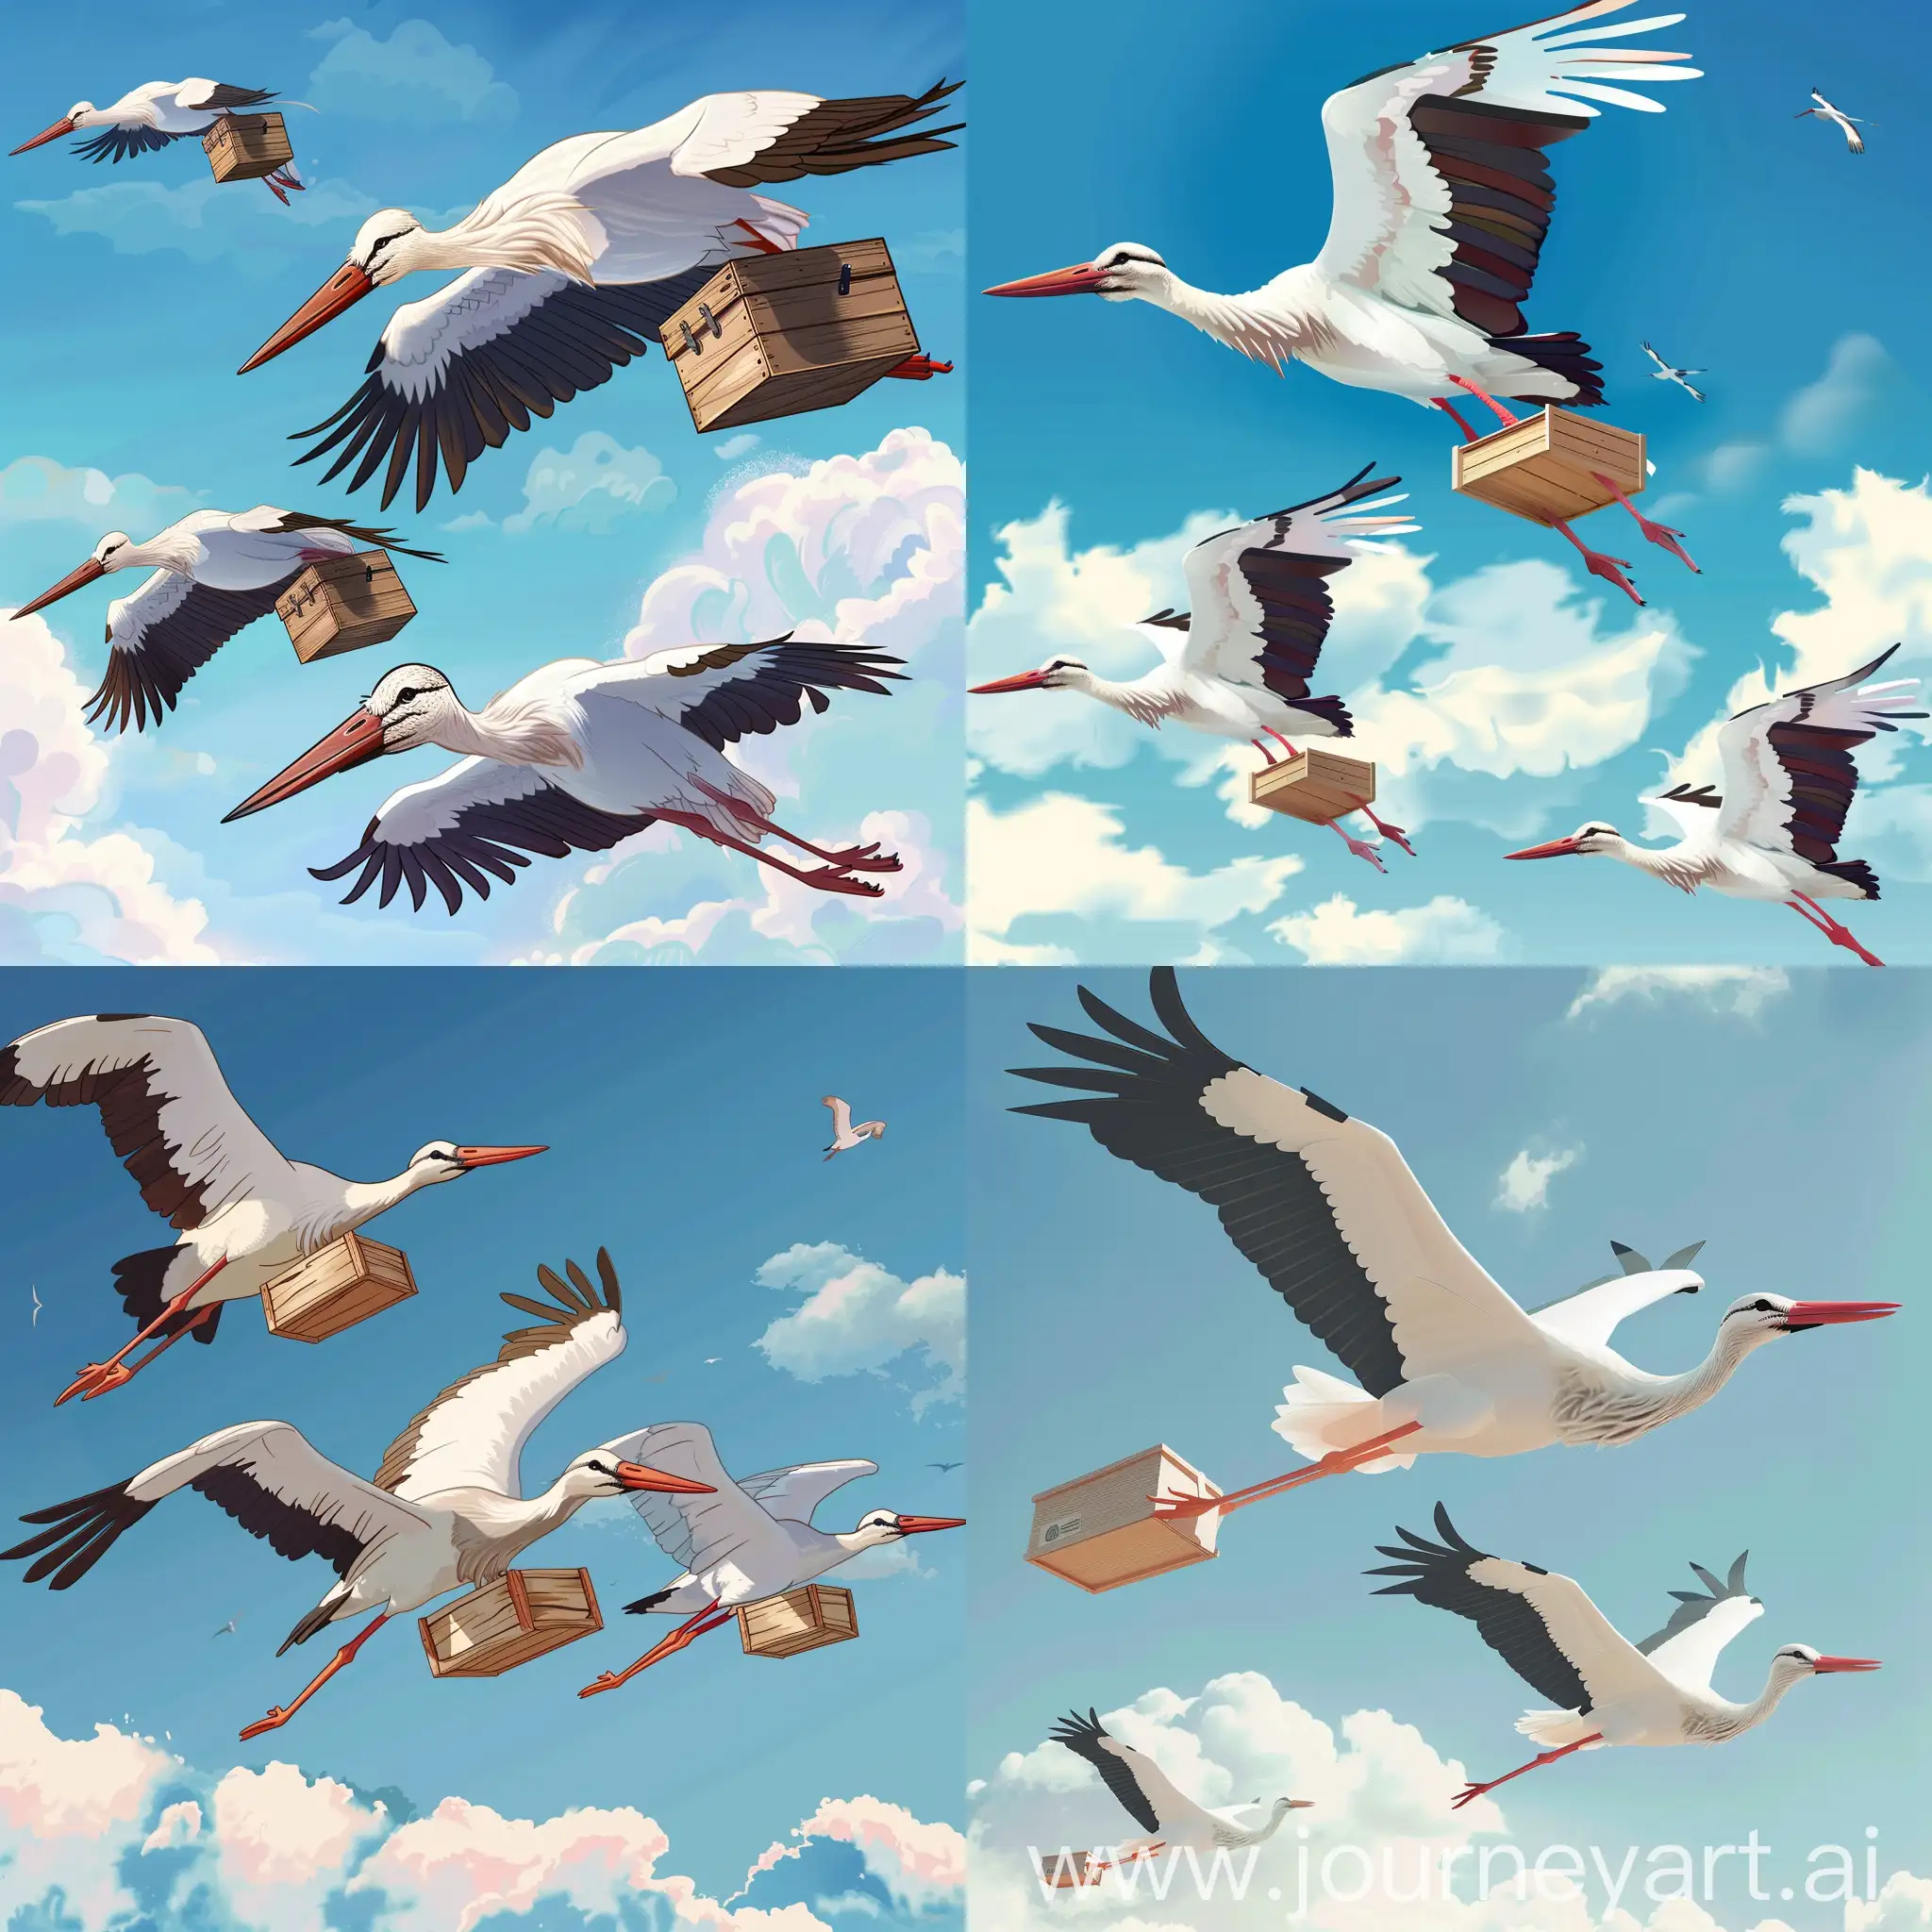 Create 3 vector storks that are flying in the sky and have wooden boxes in their beaks